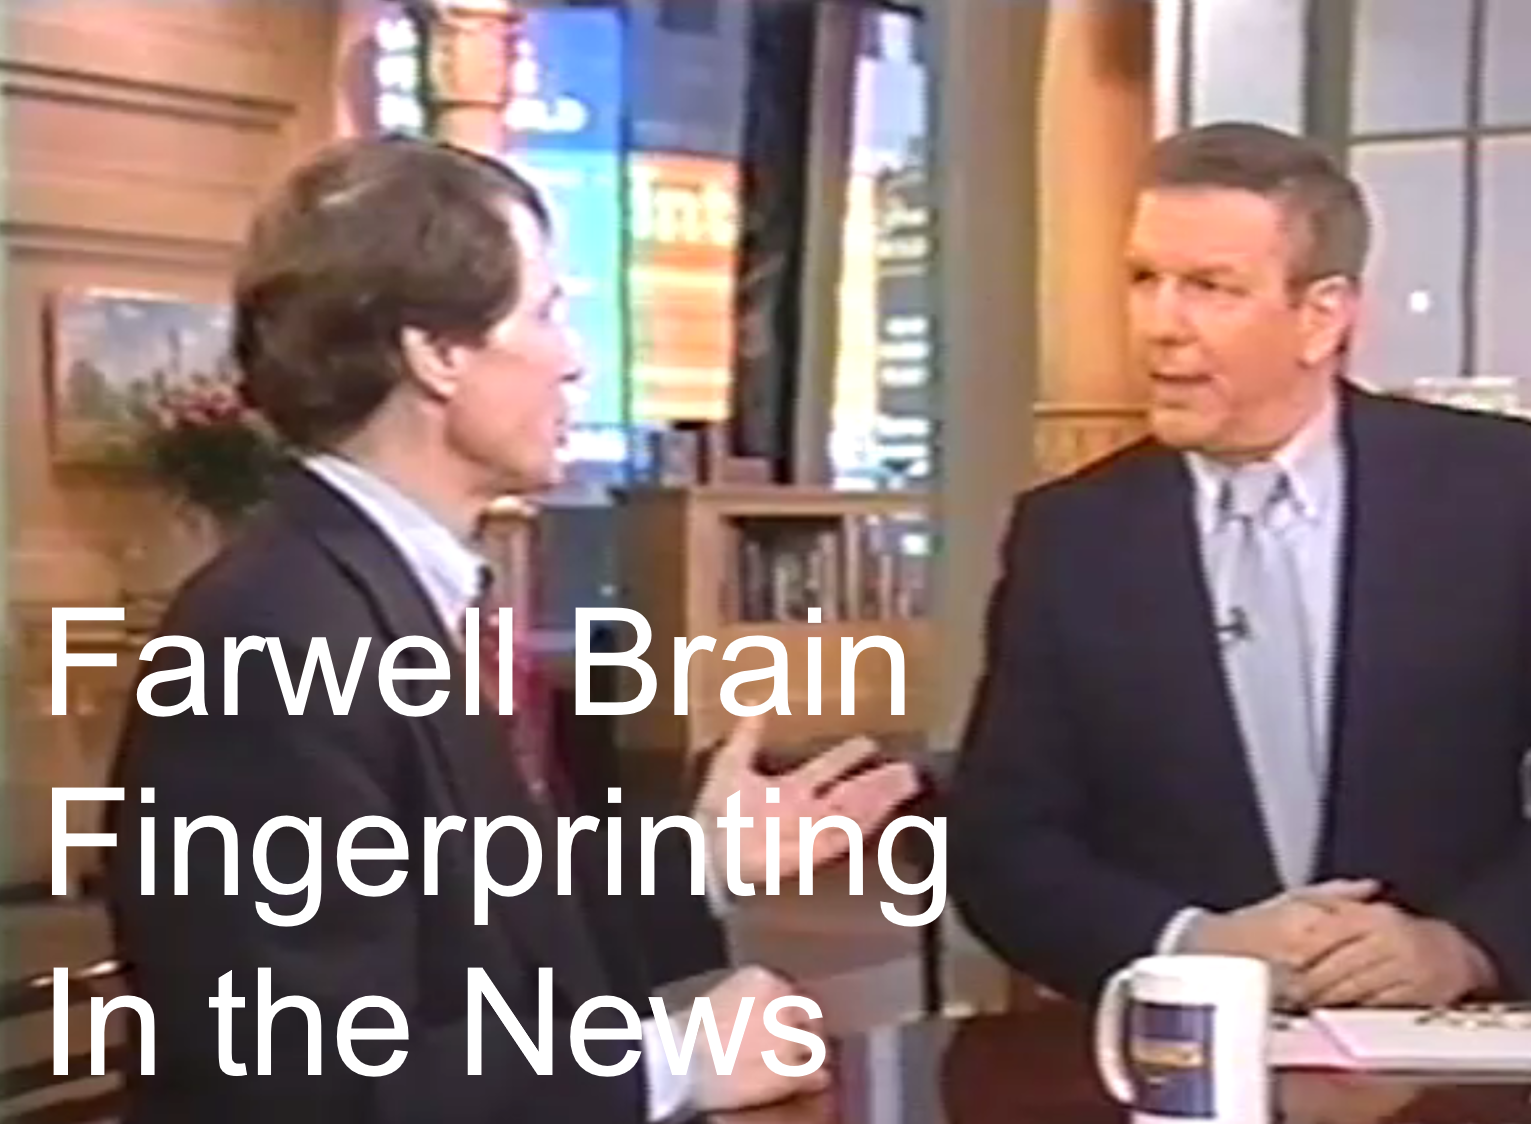 Farwell on Good Morning America - In the News
                    Label